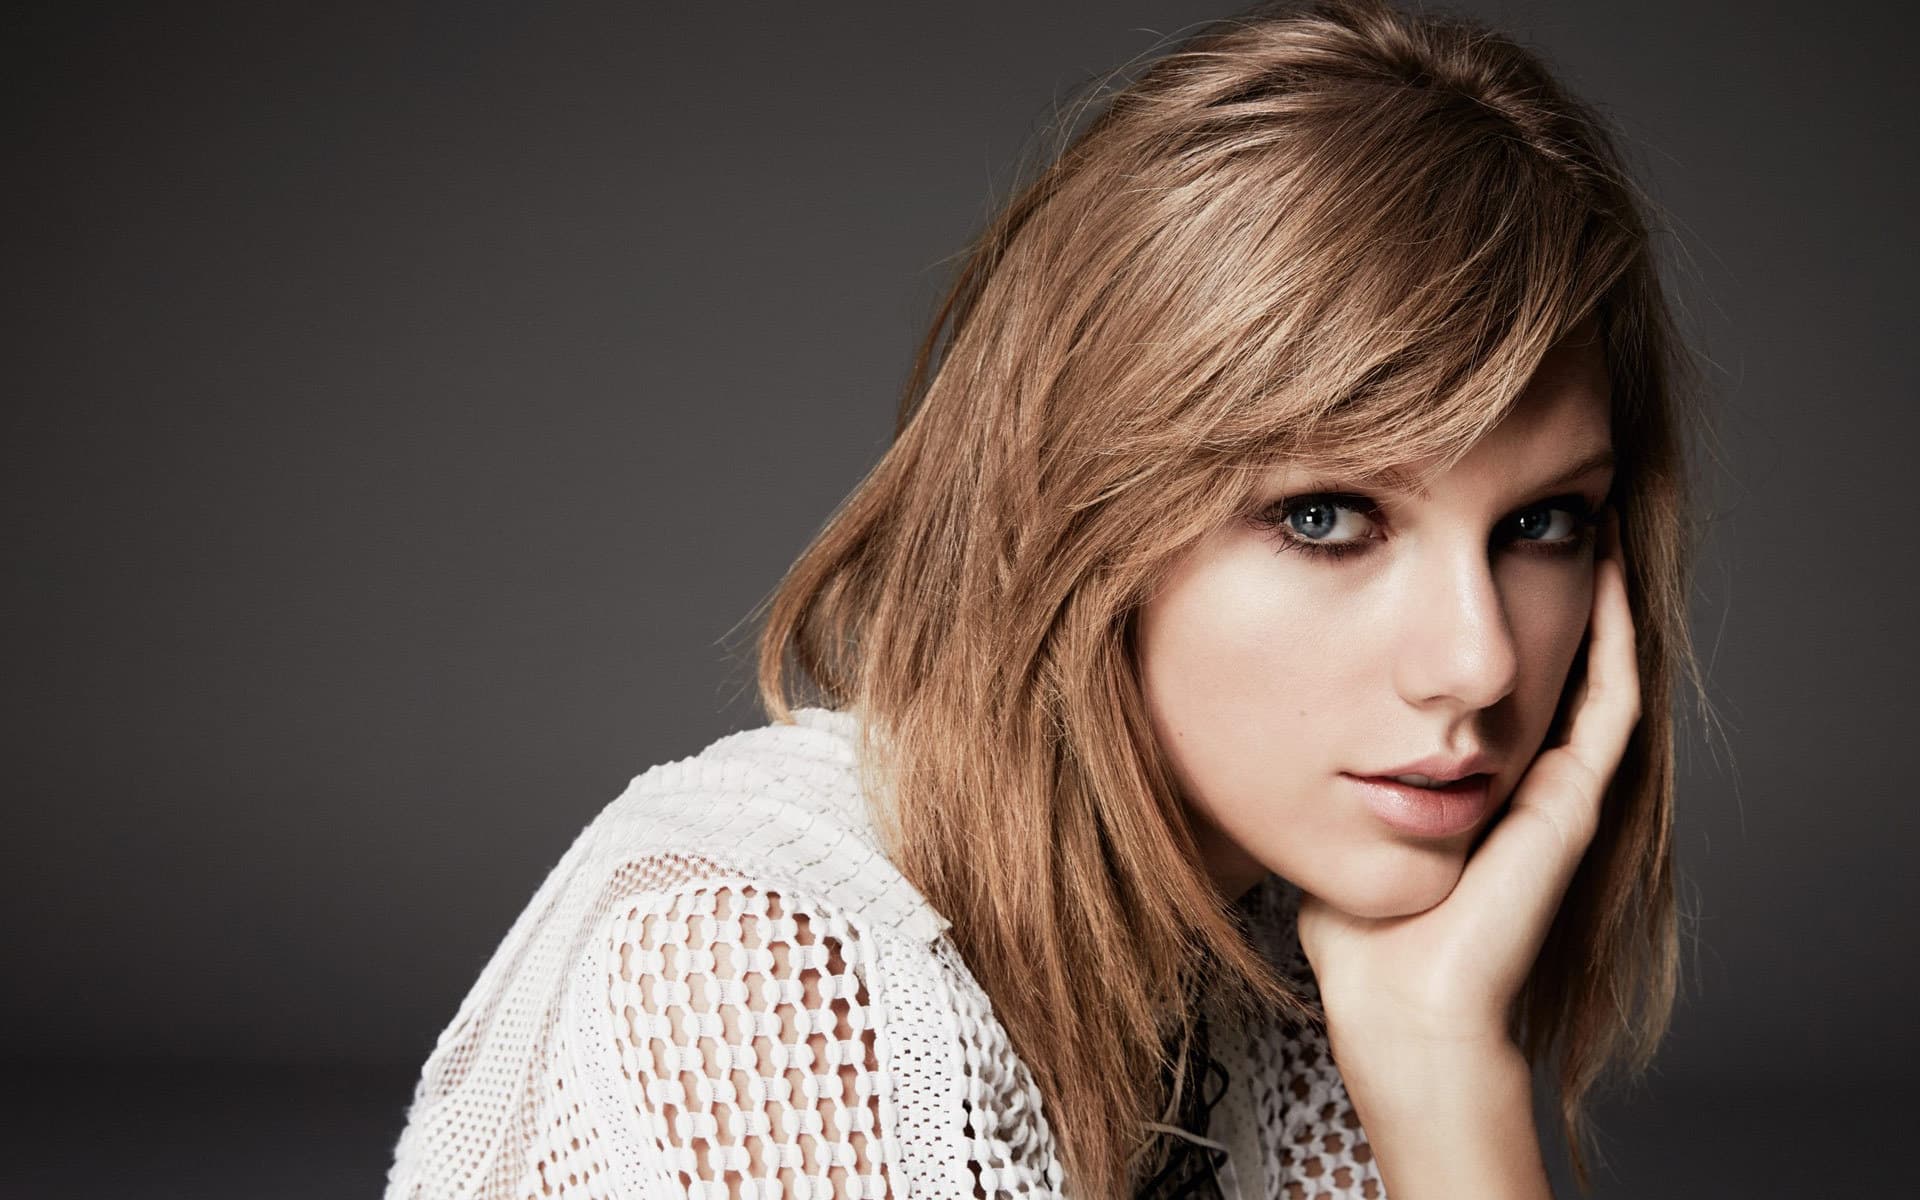 Taylor Swift Wallpaper High Quality Pictures Image For